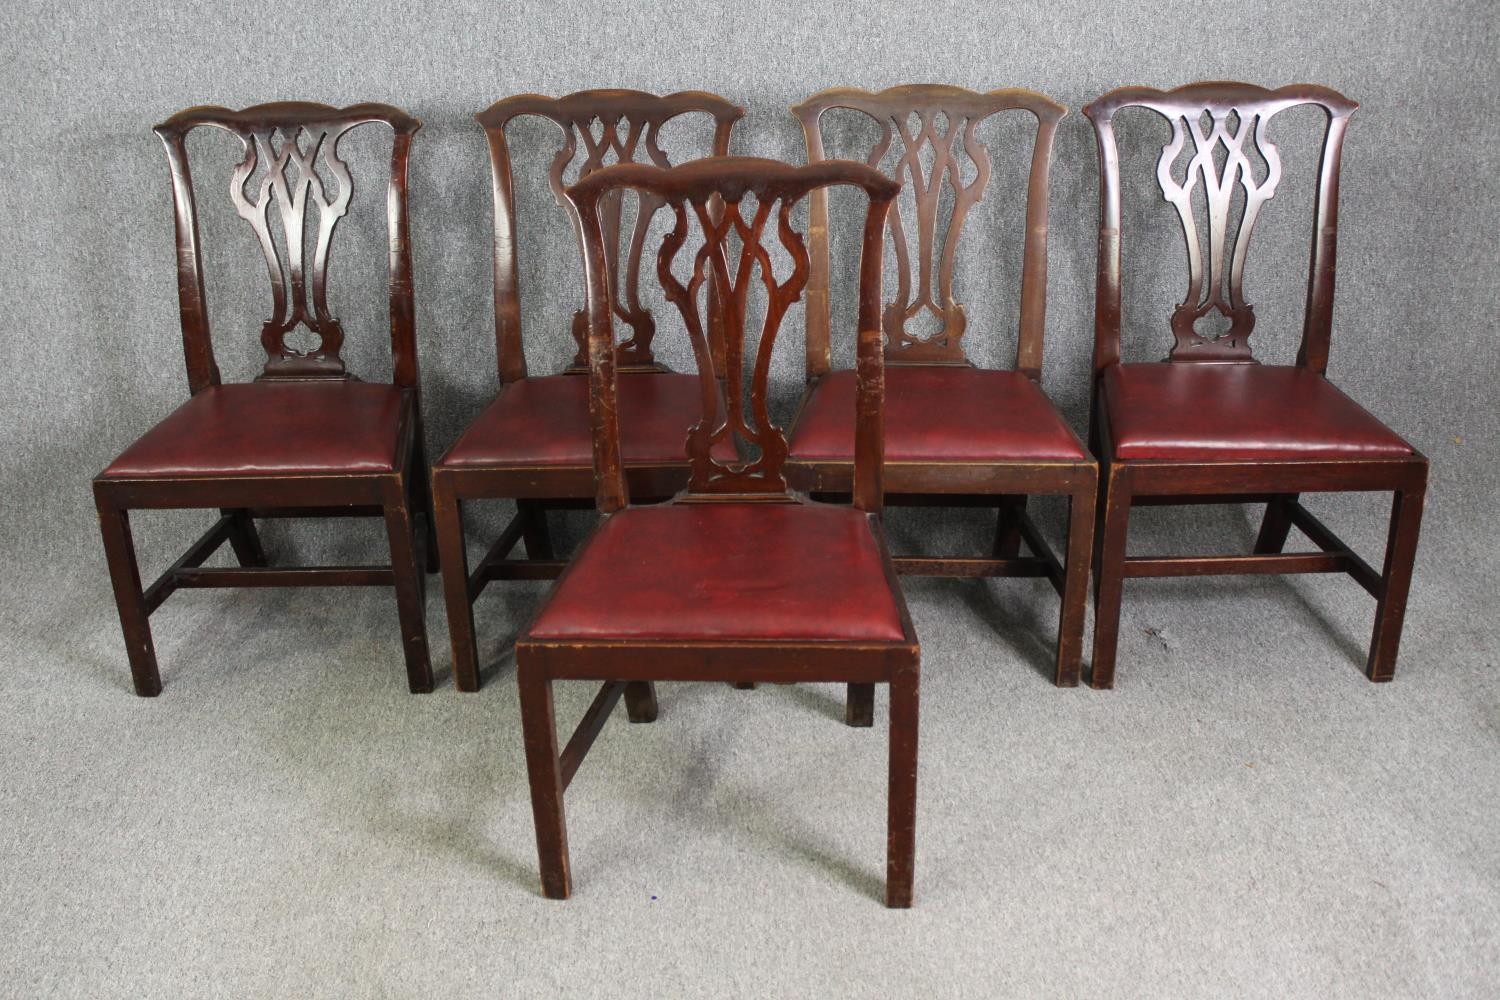 A set of five Chippendale style mahogany dining chairs, late 19th/early 20th century.